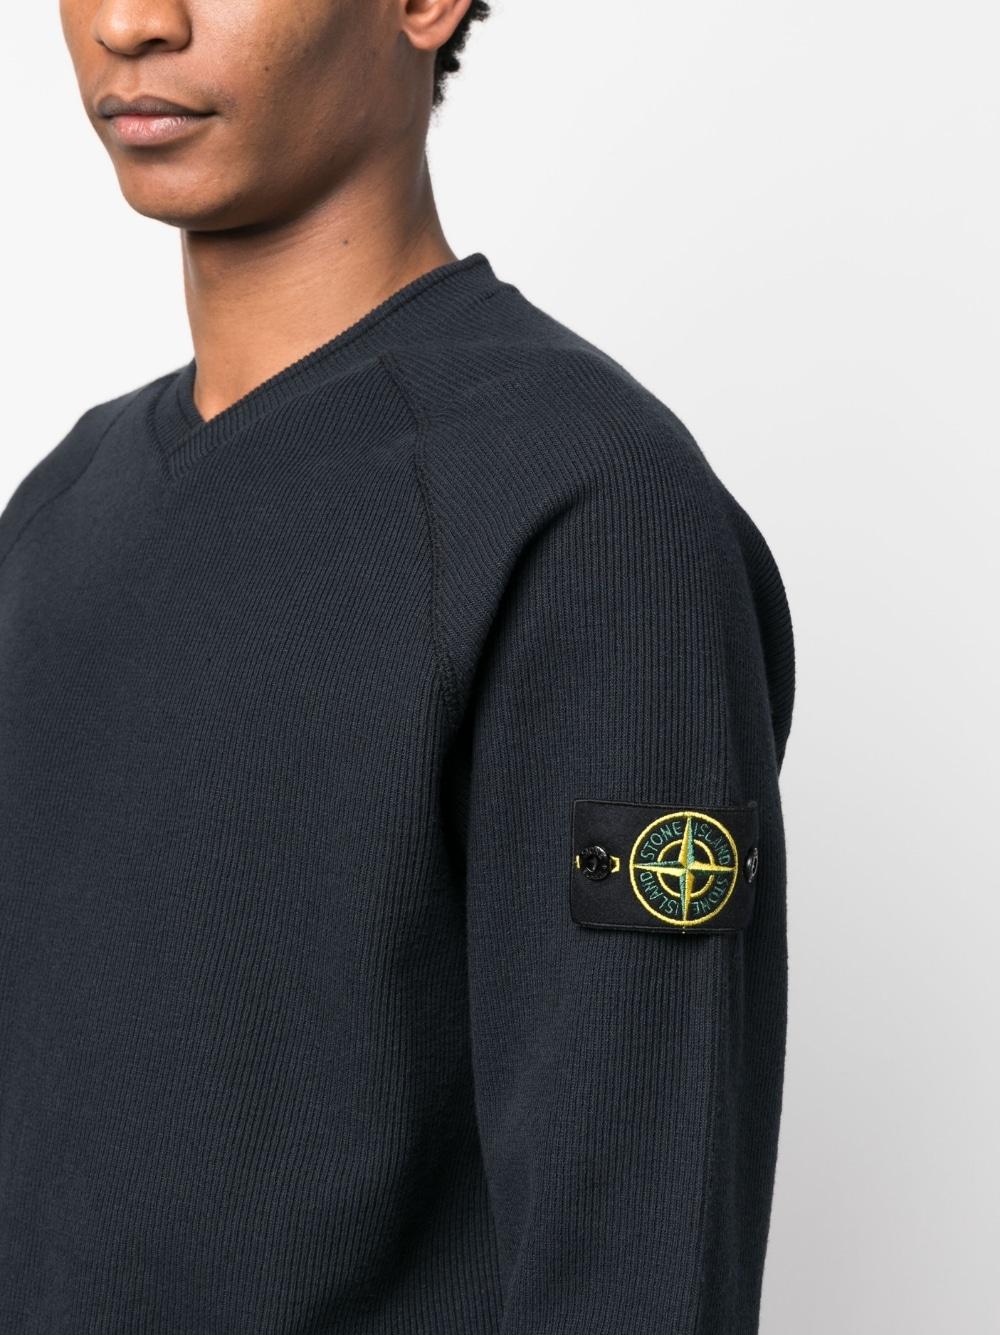 Stone Island Logo Patch Crewneck in Blue for Men | Lyst